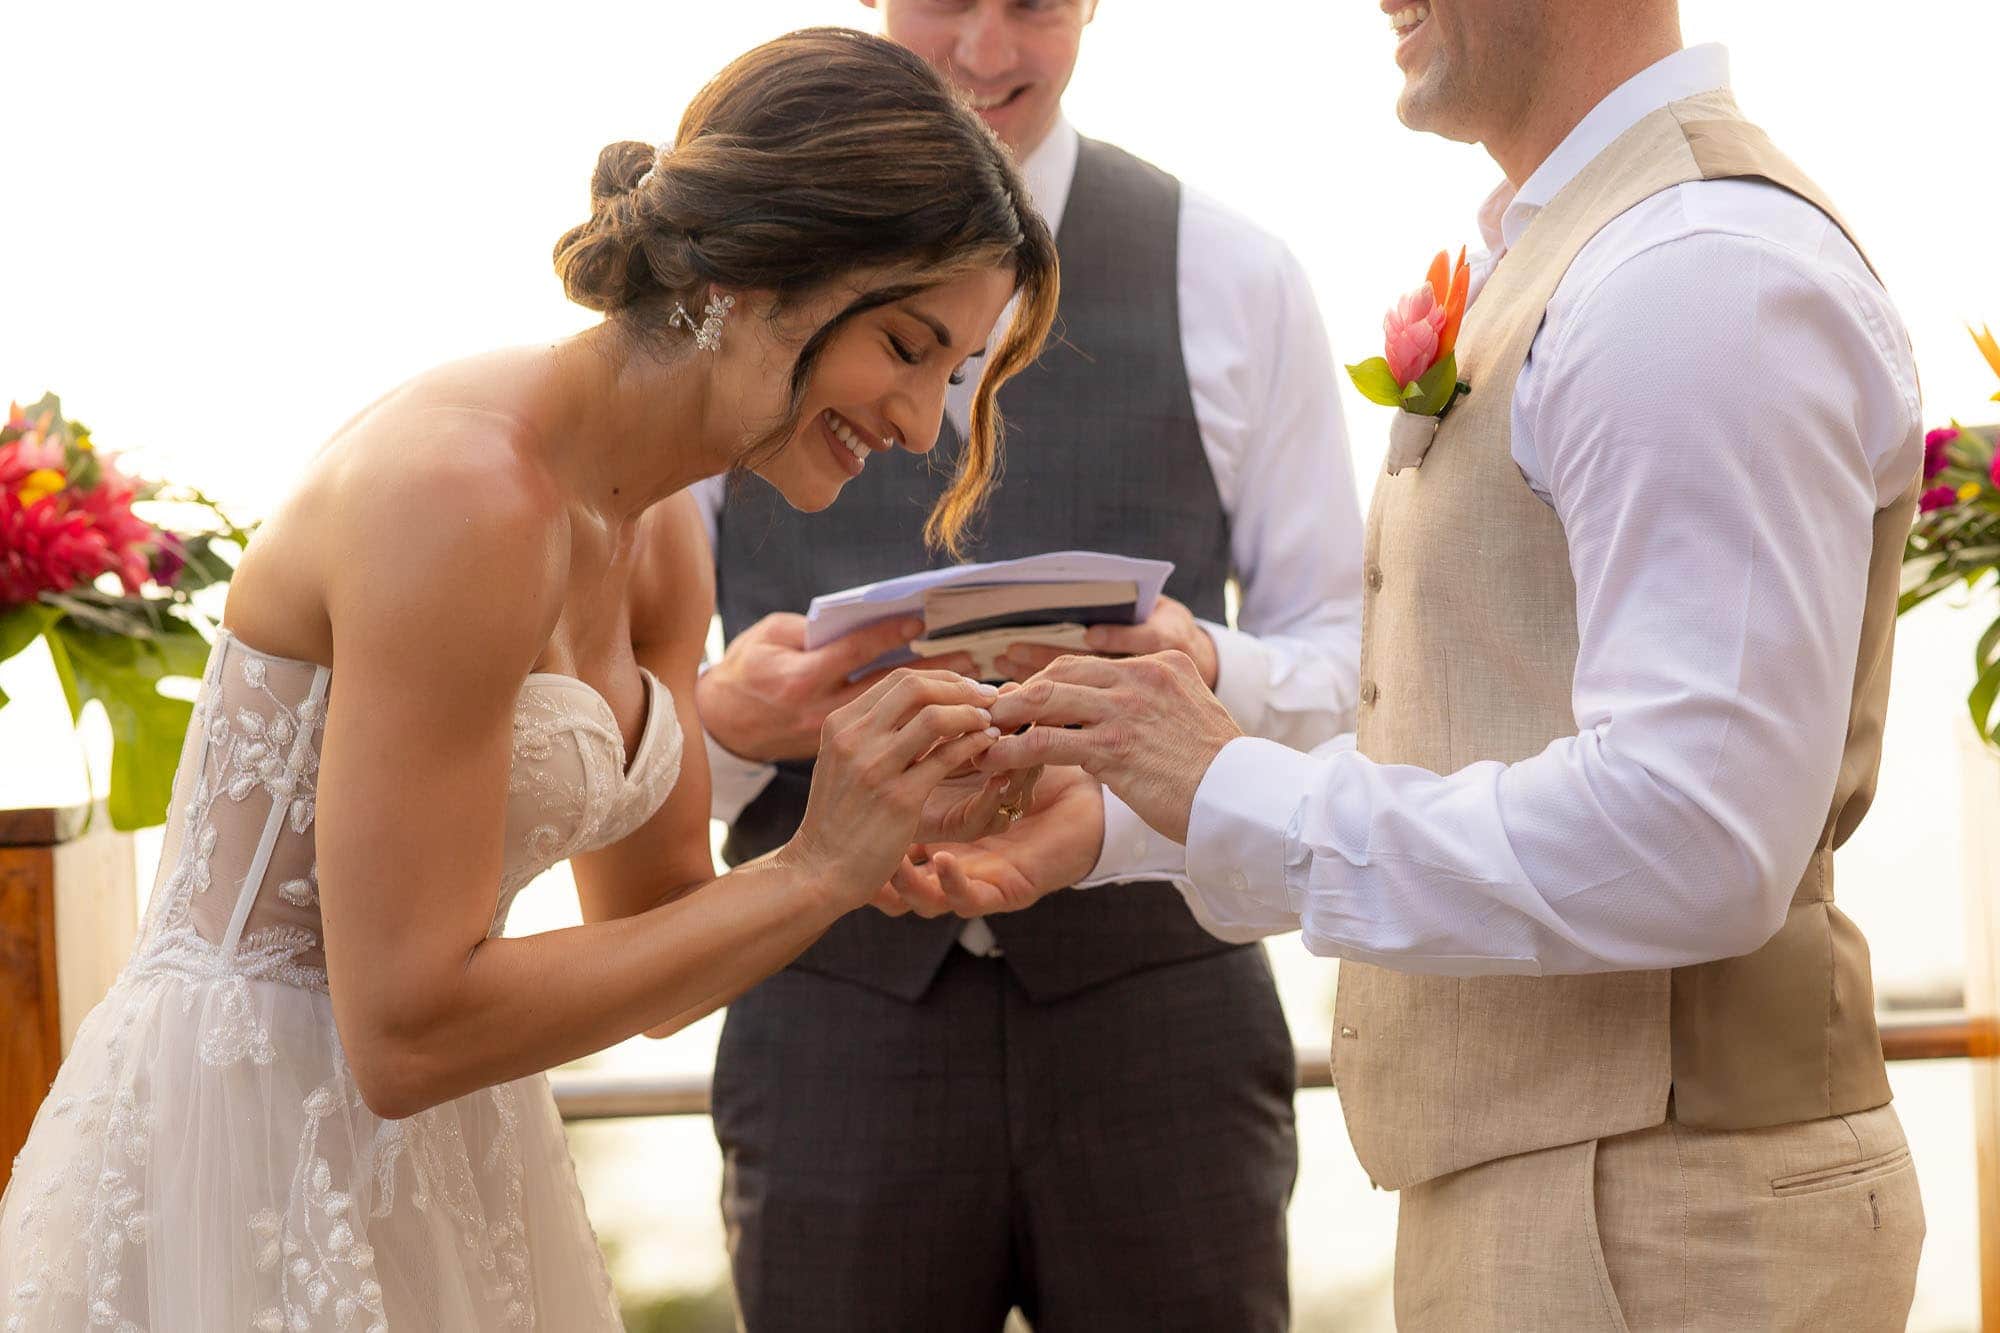 bride puts ring on the groom's finger